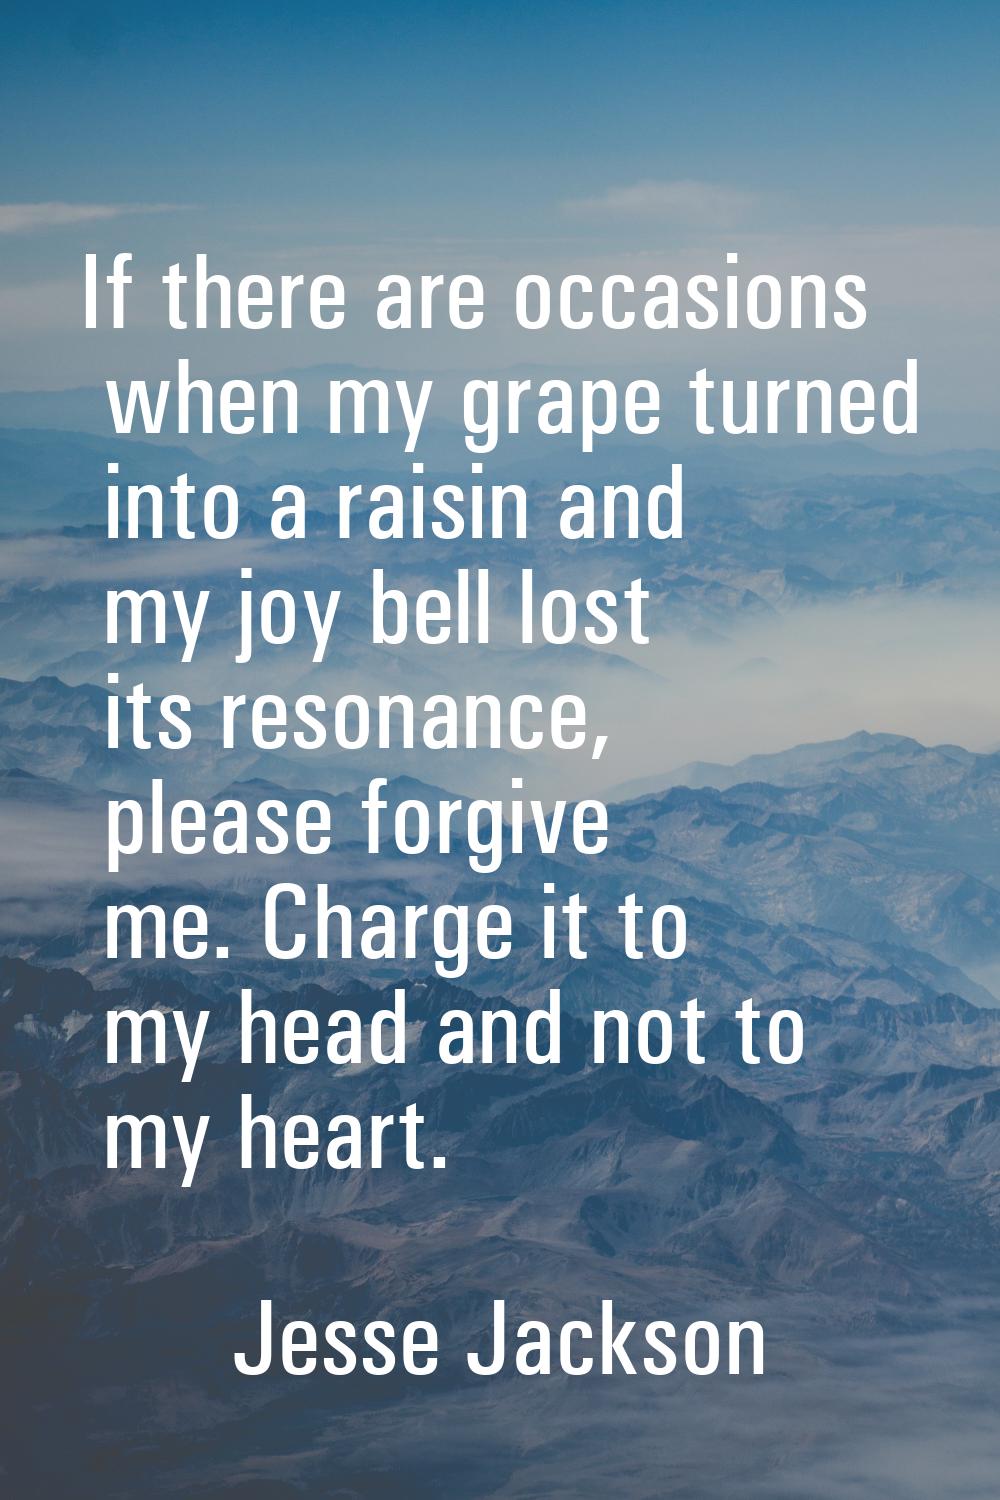 If there are occasions when my grape turned into a raisin and my joy bell lost its resonance, pleas